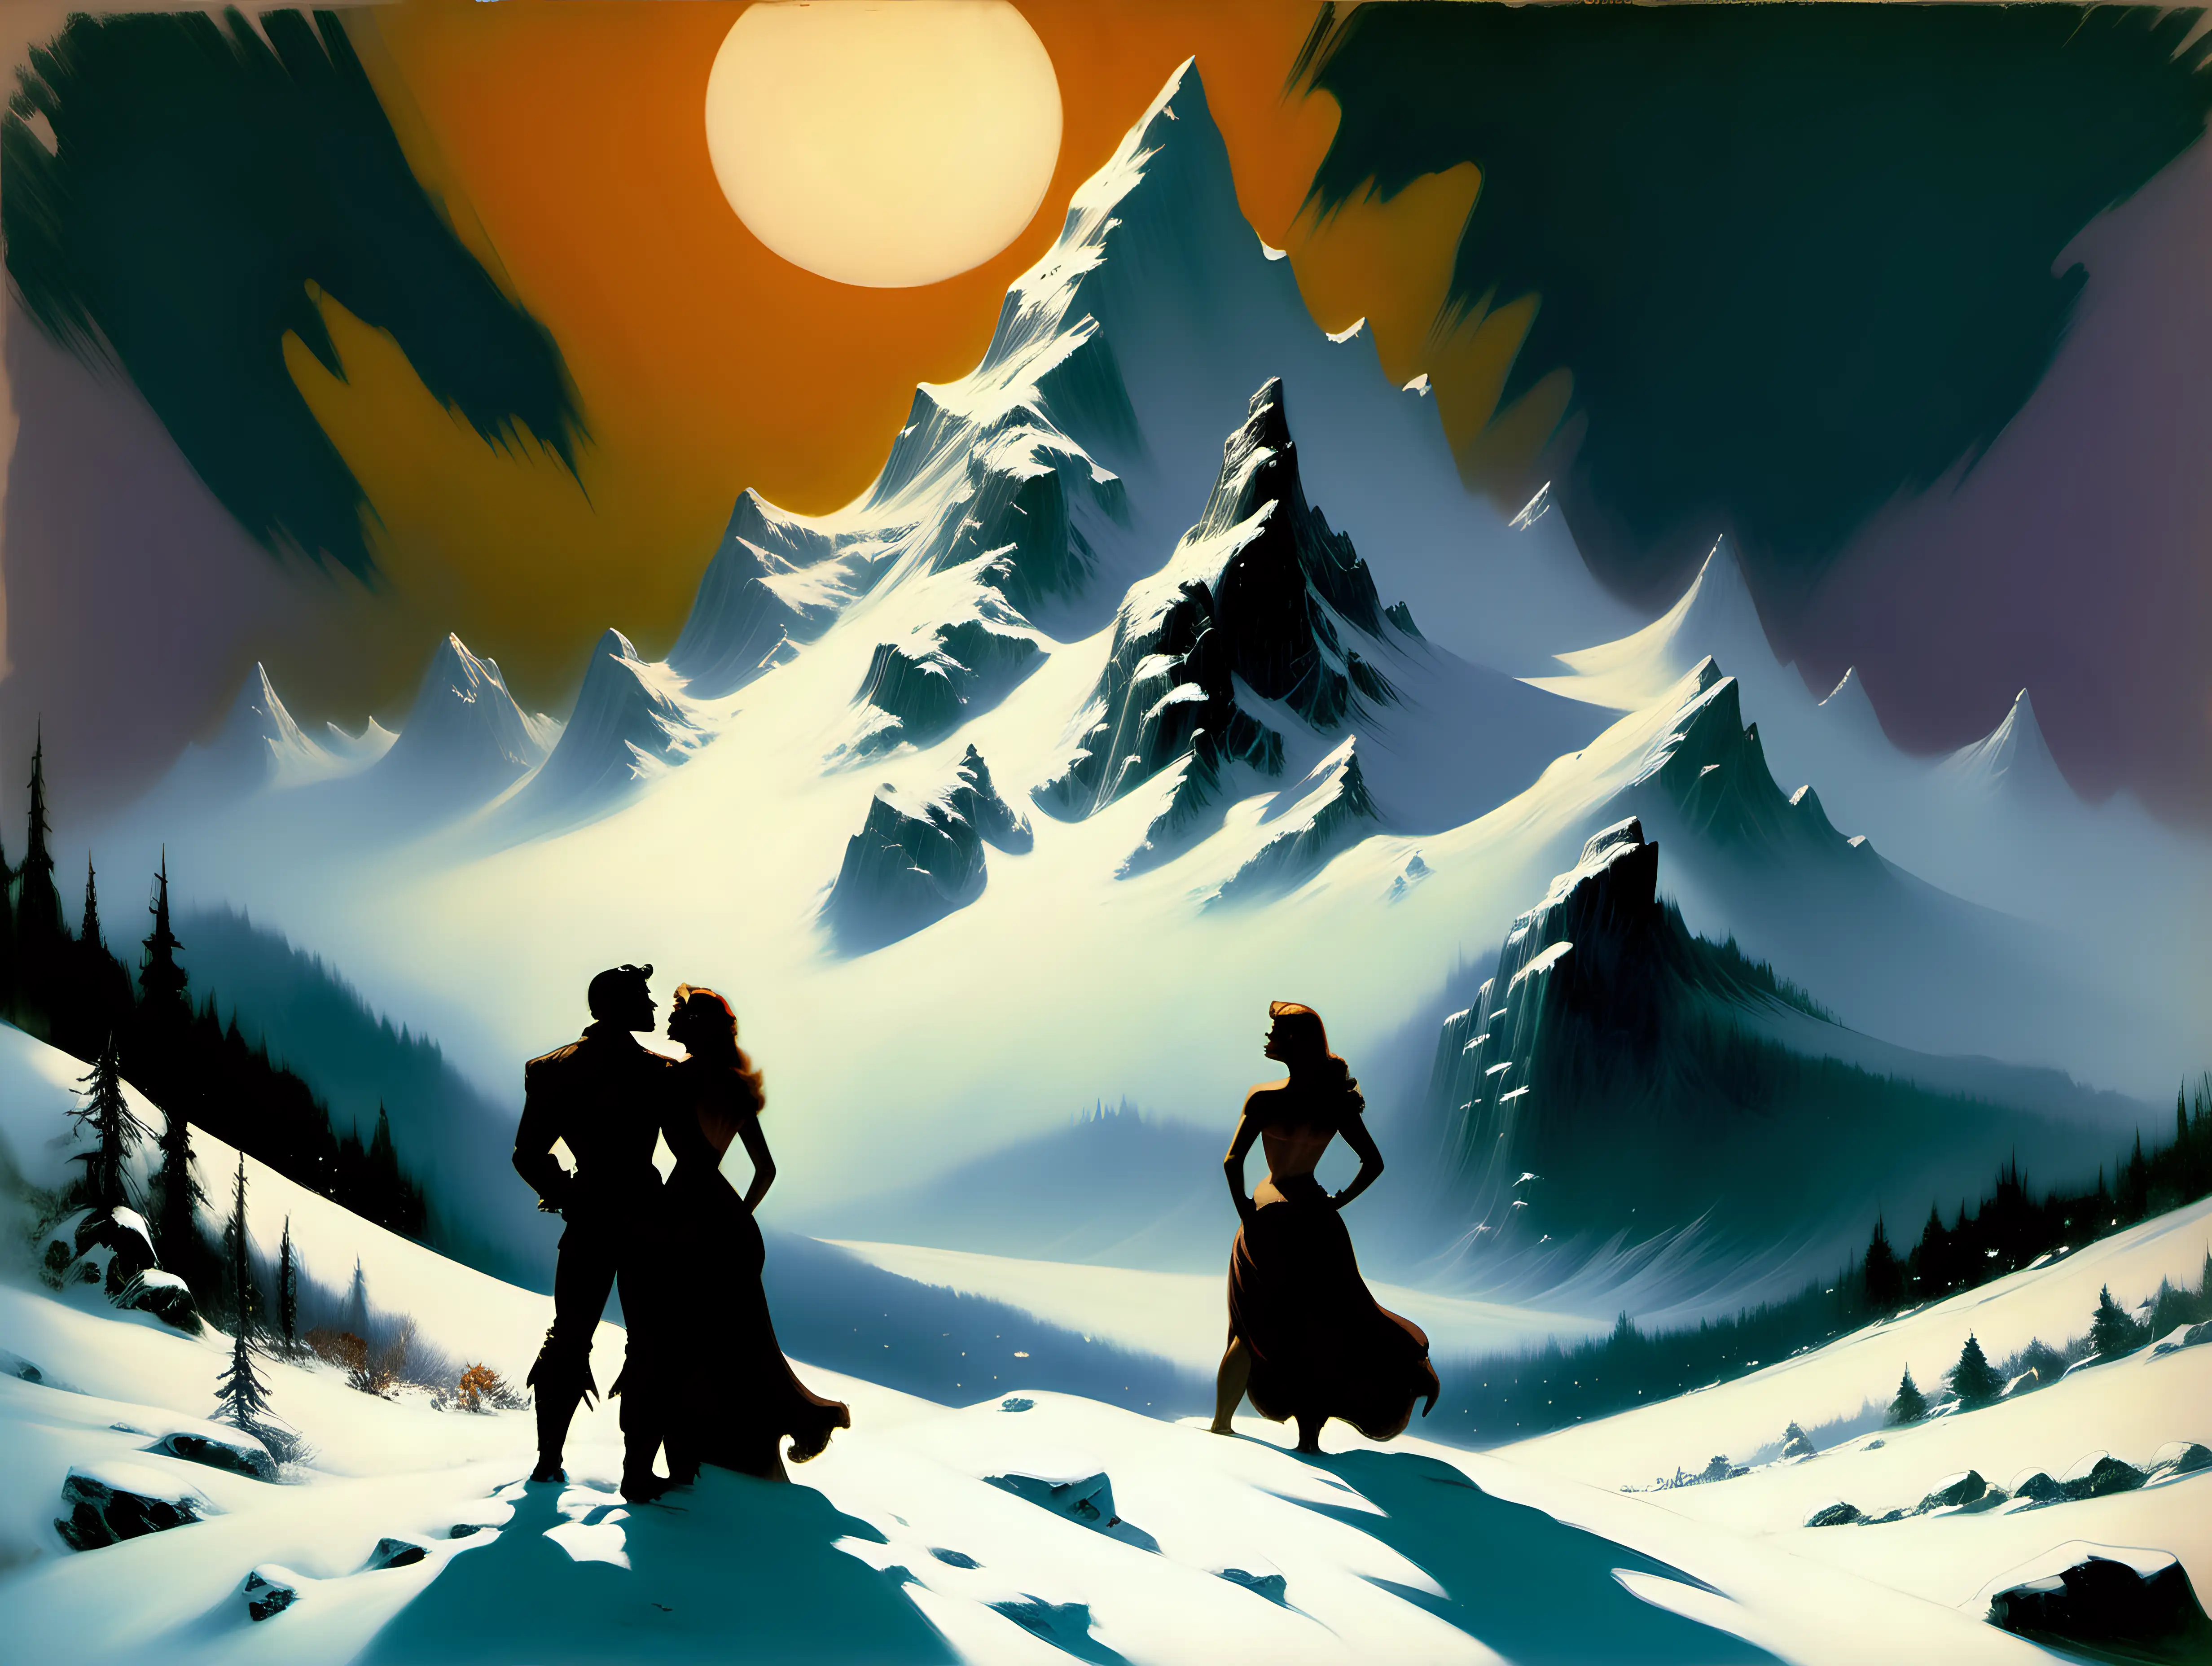 lovers looking at a snow capped mountain in style of romanticism by Frank Frazetta